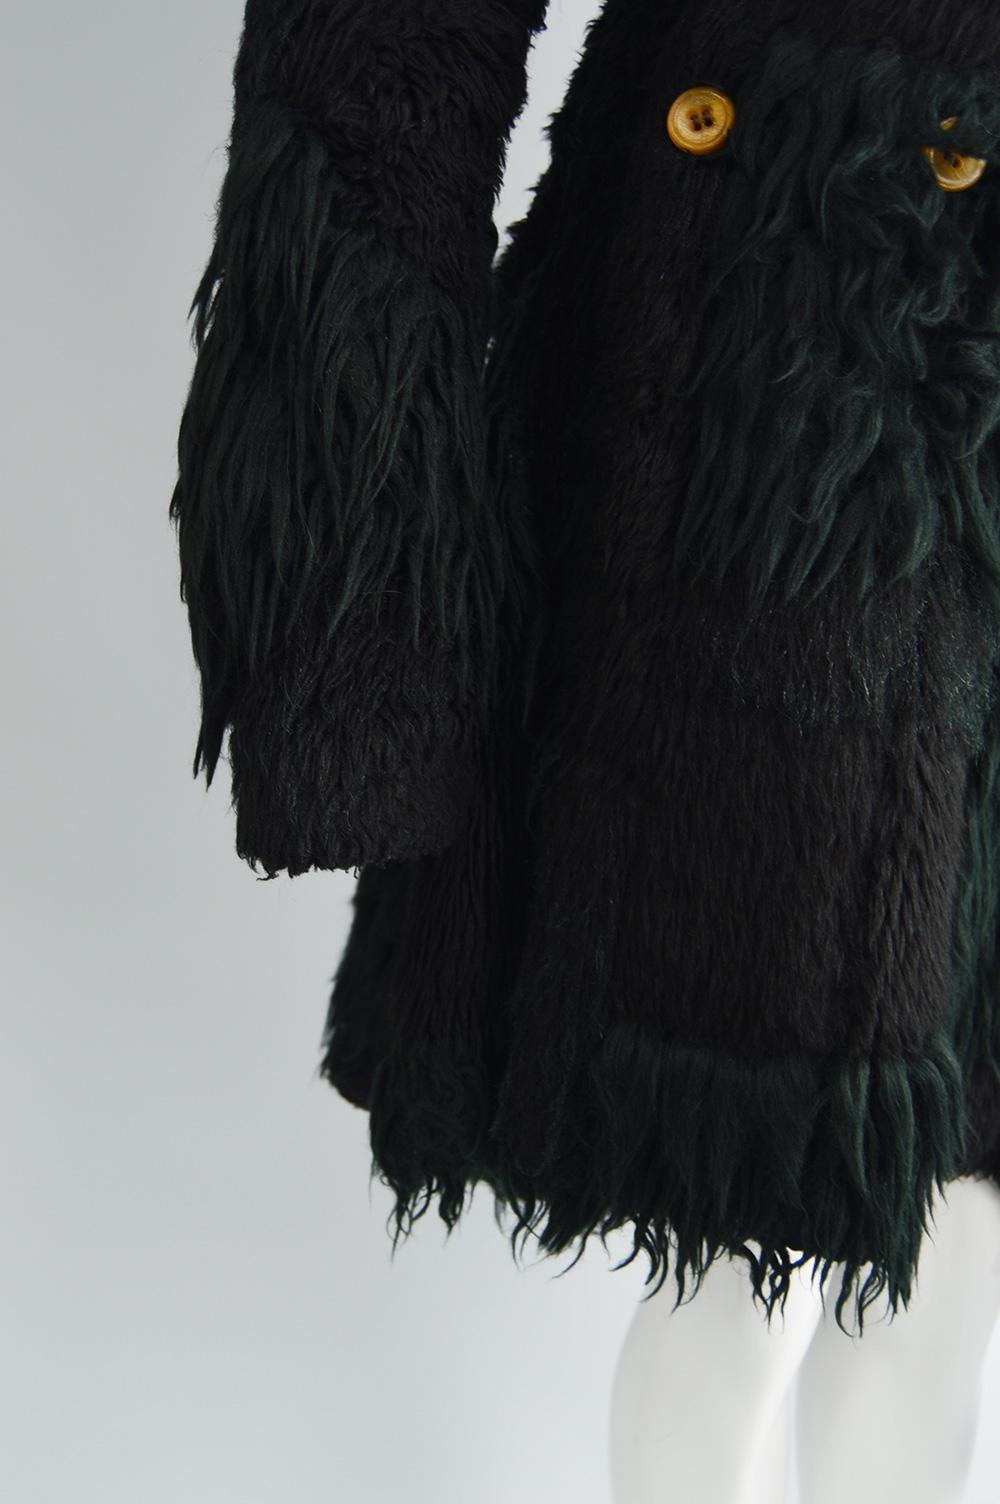 Comme Des Garcons Deconstructed Patchwork Shaggy Black Faux Fur Coat A/W 2002 In Excellent Condition For Sale In Doncaster, South Yorkshire